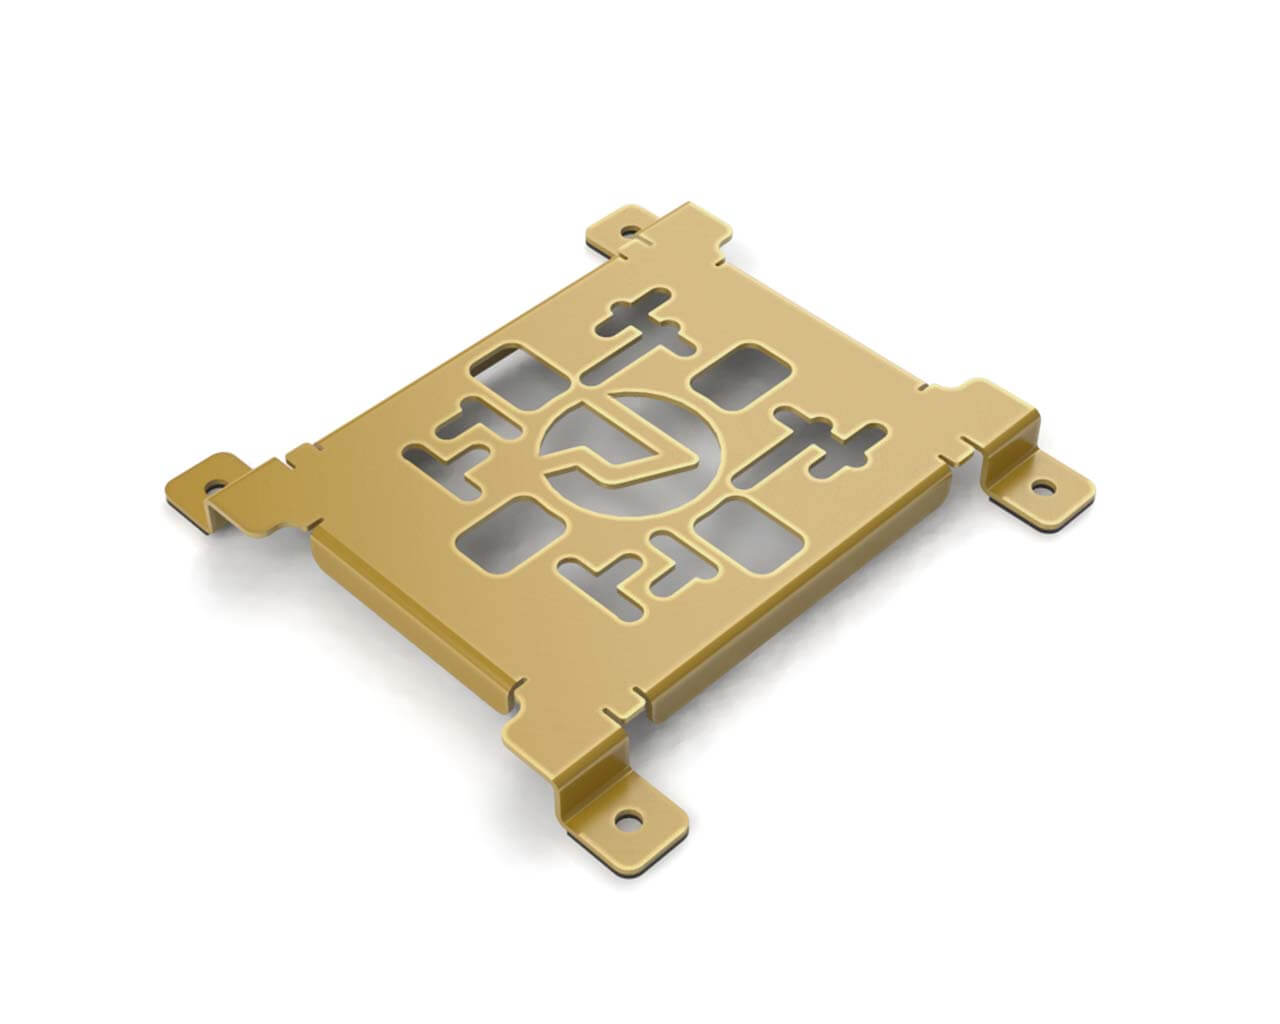 PrimoChill SX Spider Mount Bracket - 120mm Series - PrimoChill - KEEPING IT COOL Candy Gold